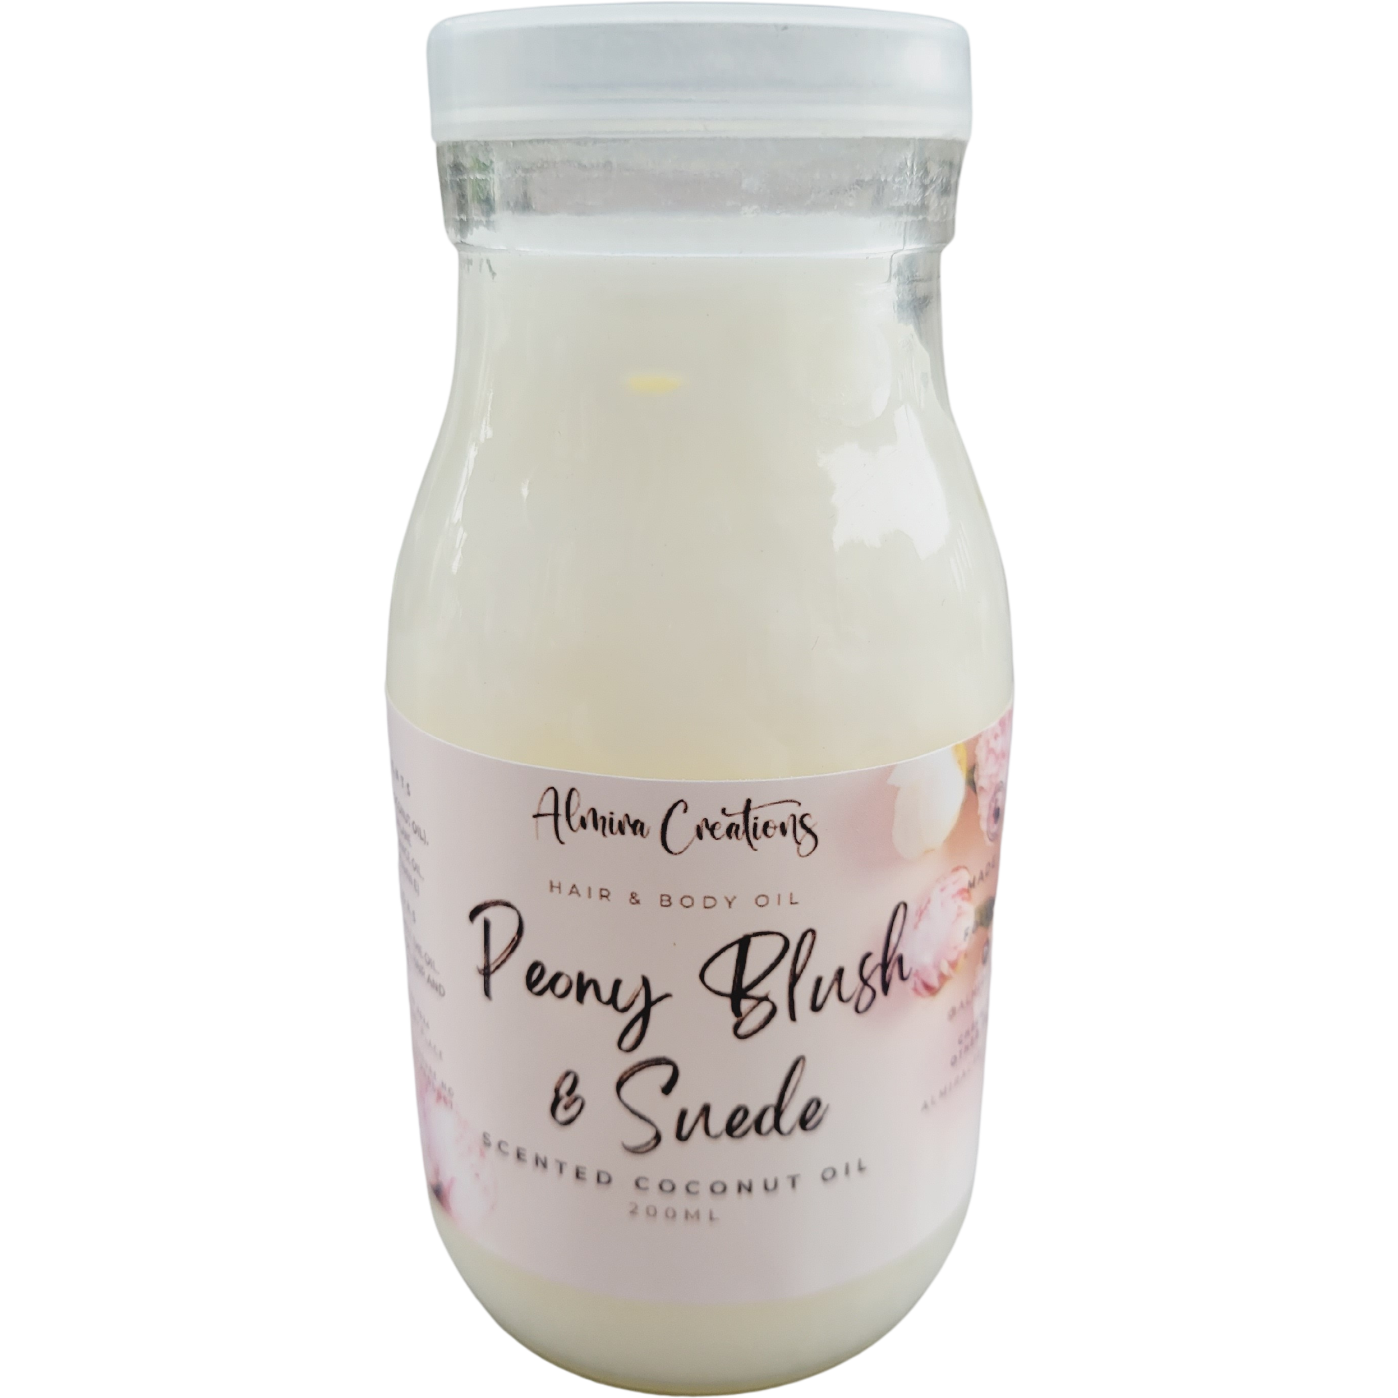 Peony Blush & Suede Scented Coconut Oil - Almira Creations